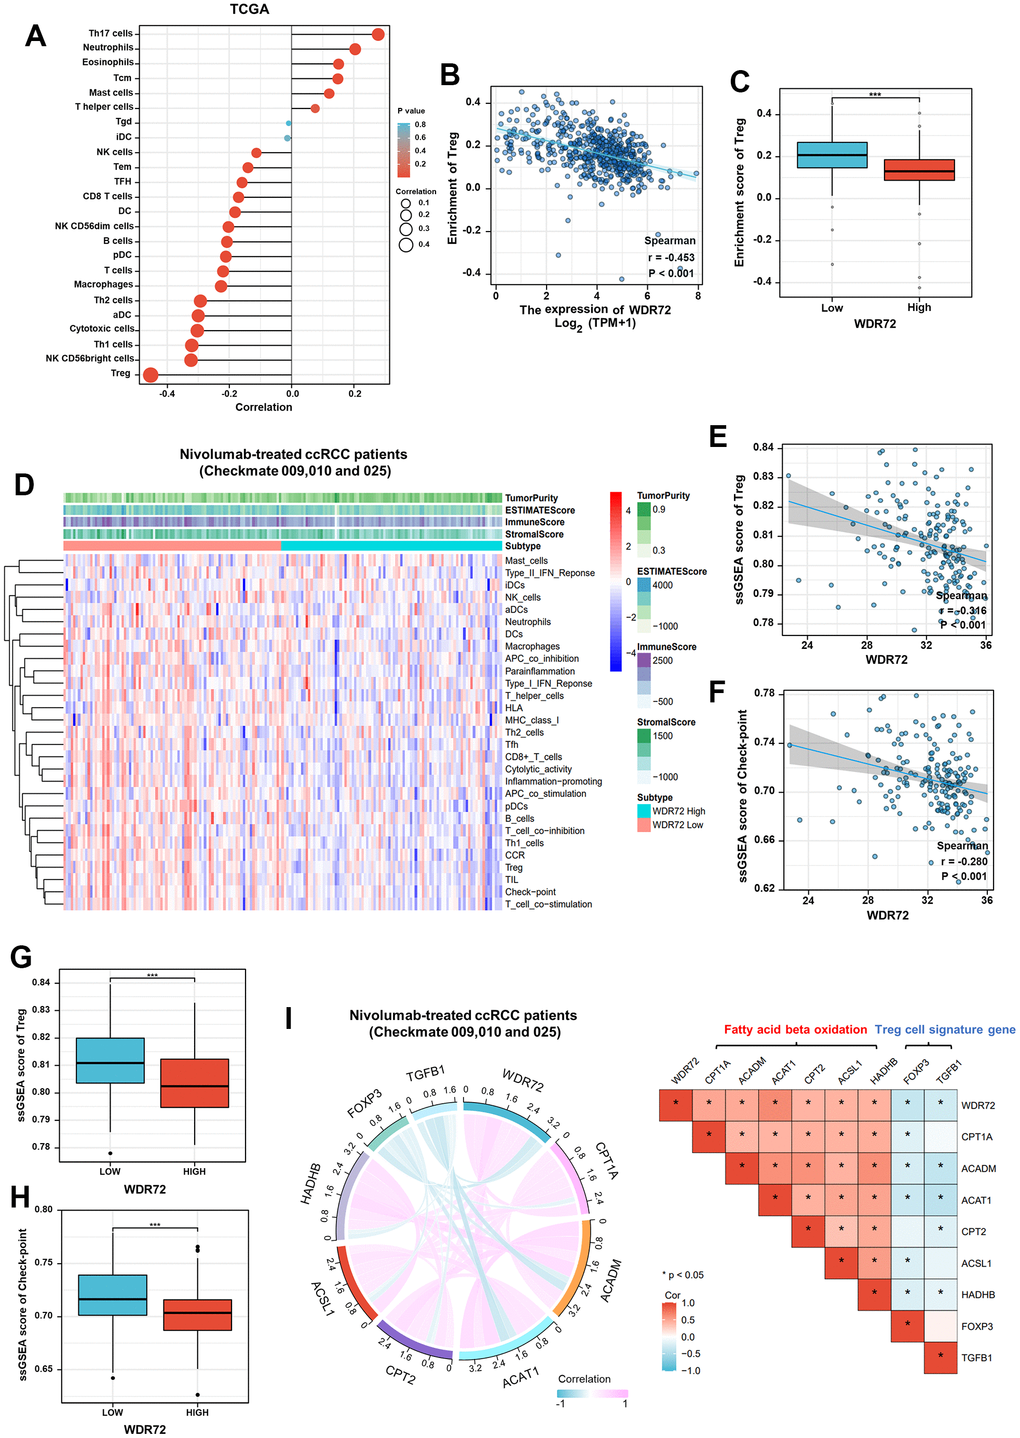 Immune-related analysis of WDR72 in TCGA and Nivolumab-treated ccRCC cohorts. (A) The correlation between WDR72 expression and infiltration level of immune cells in ccRCC from TCGA database. (B) The scatterplot showing Spearman correlation between WDR72 expression and the ssGSEA score of Treg cell in ccRCC from TCGA database. (C) Comparison of the ssGSEA scores of Treg cell between the WDR72-high and WDR72-low groups in TCGA dataset. (D) Heatmap of the ssGSEA scores integrating the tumor purity, ESTIMATE score, immune score, and stromal score of each sample between the WDR72-high and WDR72-low groups in Nivolumab-treated ccRCC patients from Checkmate 009, 010 and 025. The scatterplot showing Spearman correlation between WDR72 expression and the ssGSEA score of (E) Treg cell or (F) check-point in Nivolumab-treated ccRCC patients. Comparison of the ssGSEA scores of (G) Treg cell and (H) check-point between the WDR72-high and WDR72-low groups in Nivolumab-treated ccRCC patients. (I) Correlation analyses among WDR72, pivotal genes of fatty acid beta oxidation, and Treg cell signature genes in Nivolumab-treated ccRCC patients. Abbreviations: Treg cell, Regulatory T cell; ssGSEA, single sample Gene Set Enrichment Analysis. * P 